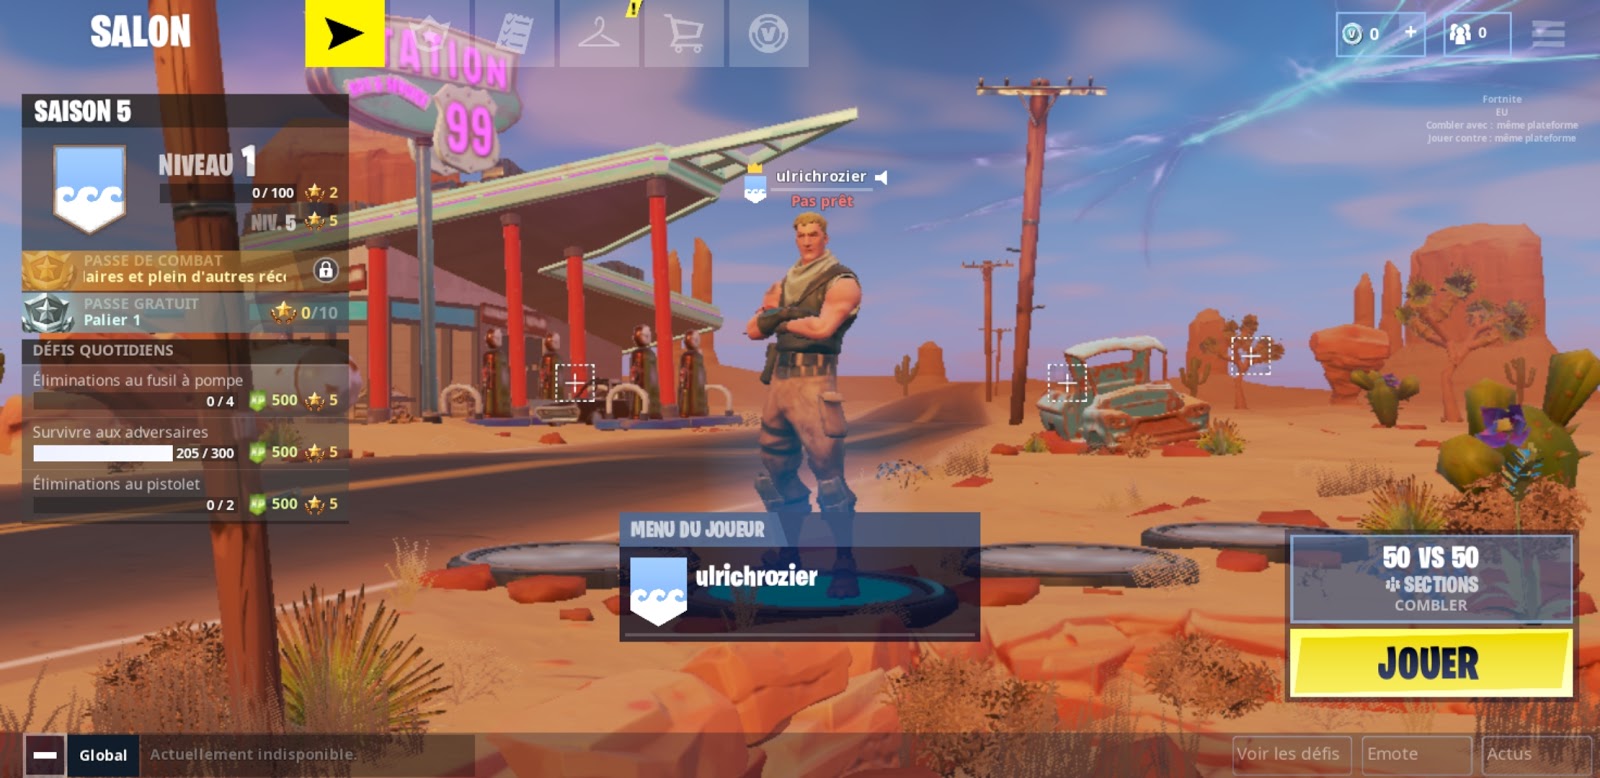 How To Install Fortnite Battle Royale On Any Android Device - you will need to access it from your mobile device as it is a direct link to the fortnite installer